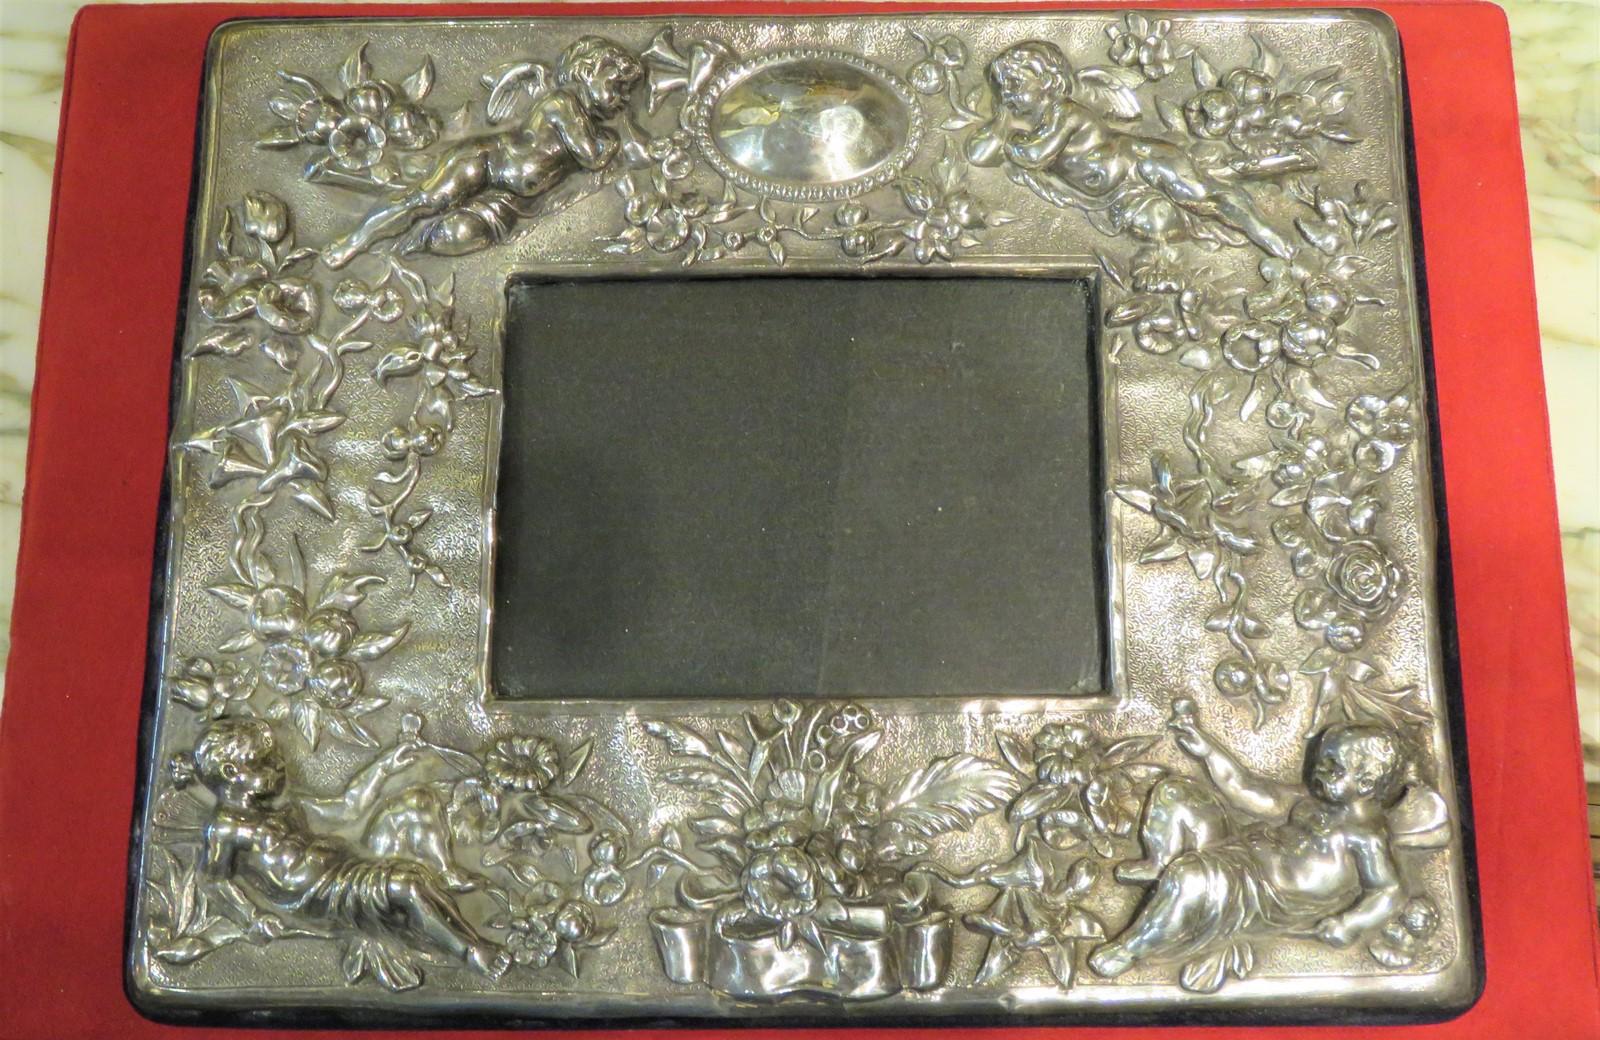 The Following Item we are offering is a Beautiful European Estate Rococo Sterling Picture Frame with Hand Hammered Embossed Cherubs holding Wreaths of Garland and Floral Motifs. Signed Sterling 925. Taken out of a Several Million Dollar NYC Estate